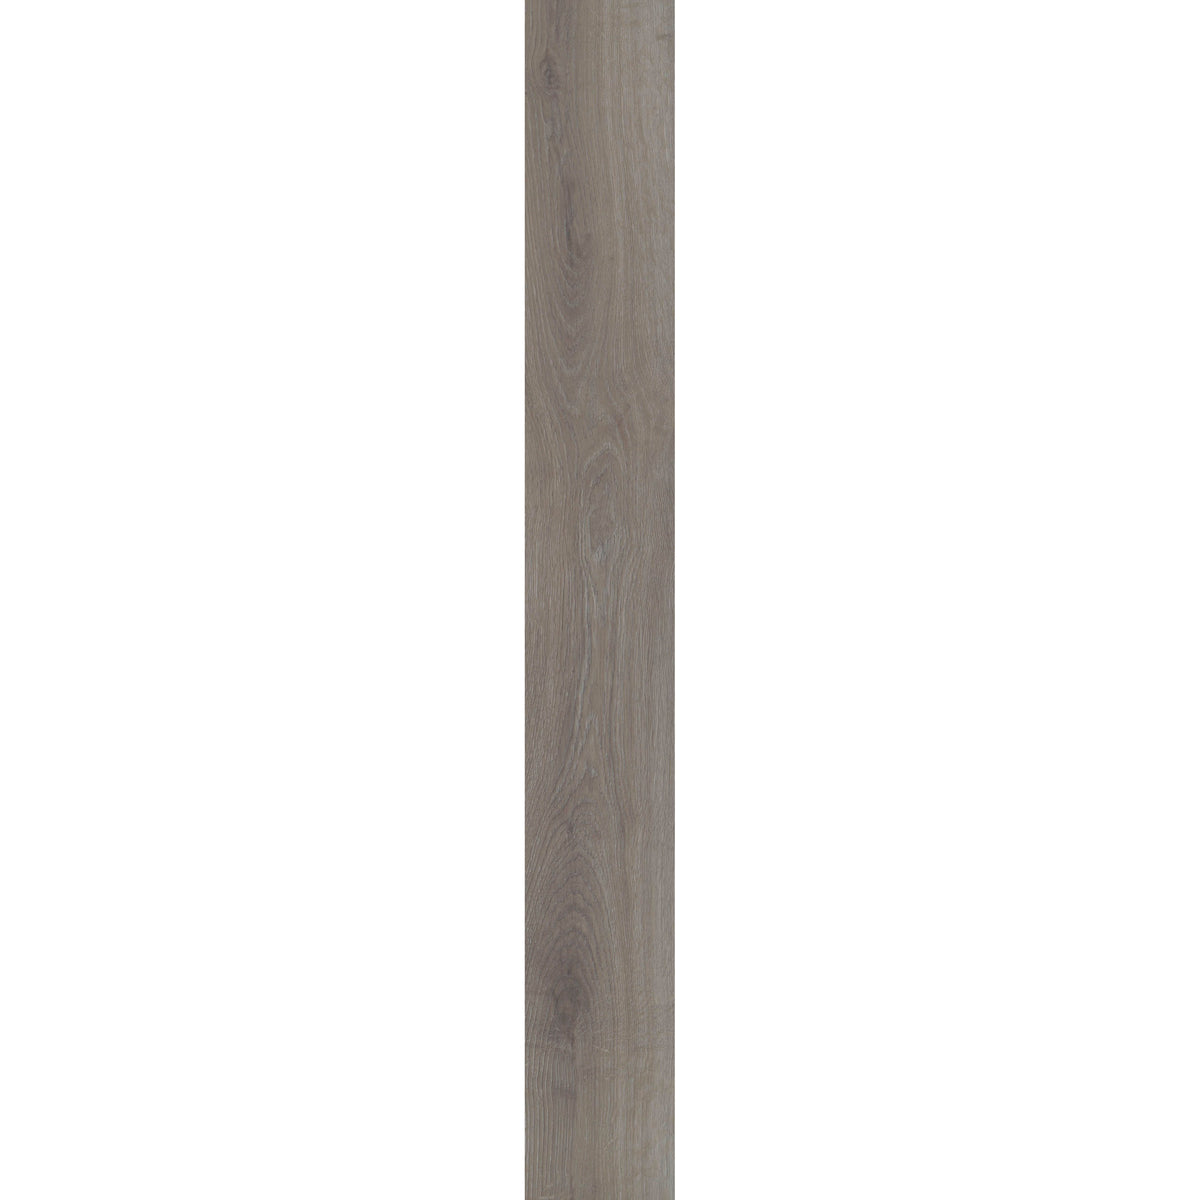 Shaw Contract - Branching Out 5mm - 6 in. x 48 in. Luxury Vinyl - Traverse Oak